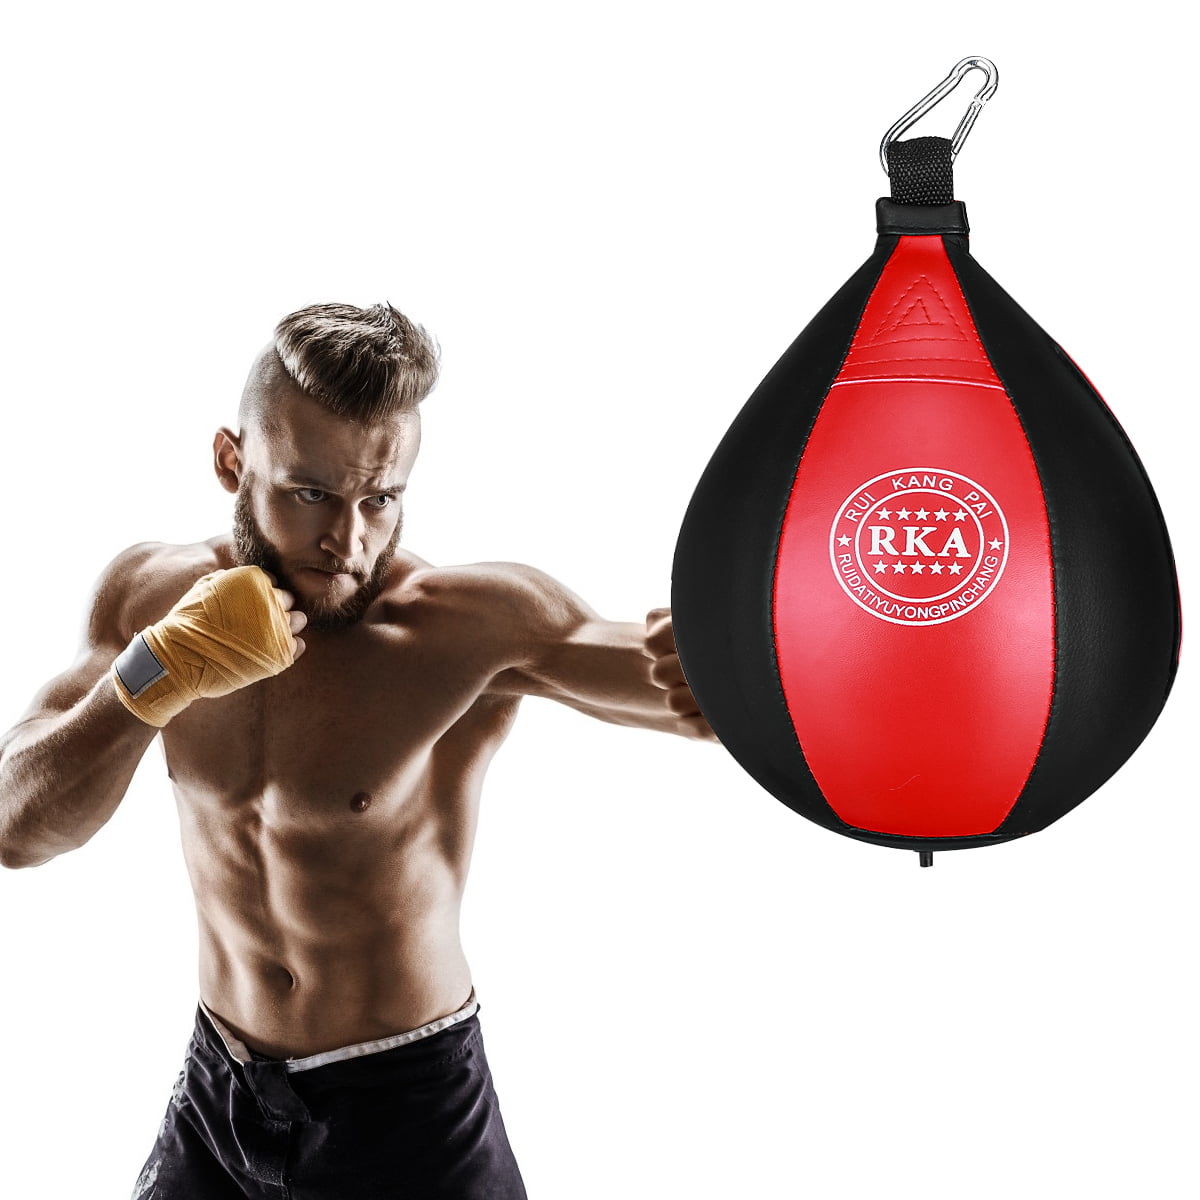 Pear Shaped Punching Bag with PU Leather Swivel Punch Hooking Hanging Speed Dodge Ball Suitable for Boxing Training/Daily Exercise Boxing Speed Ball 